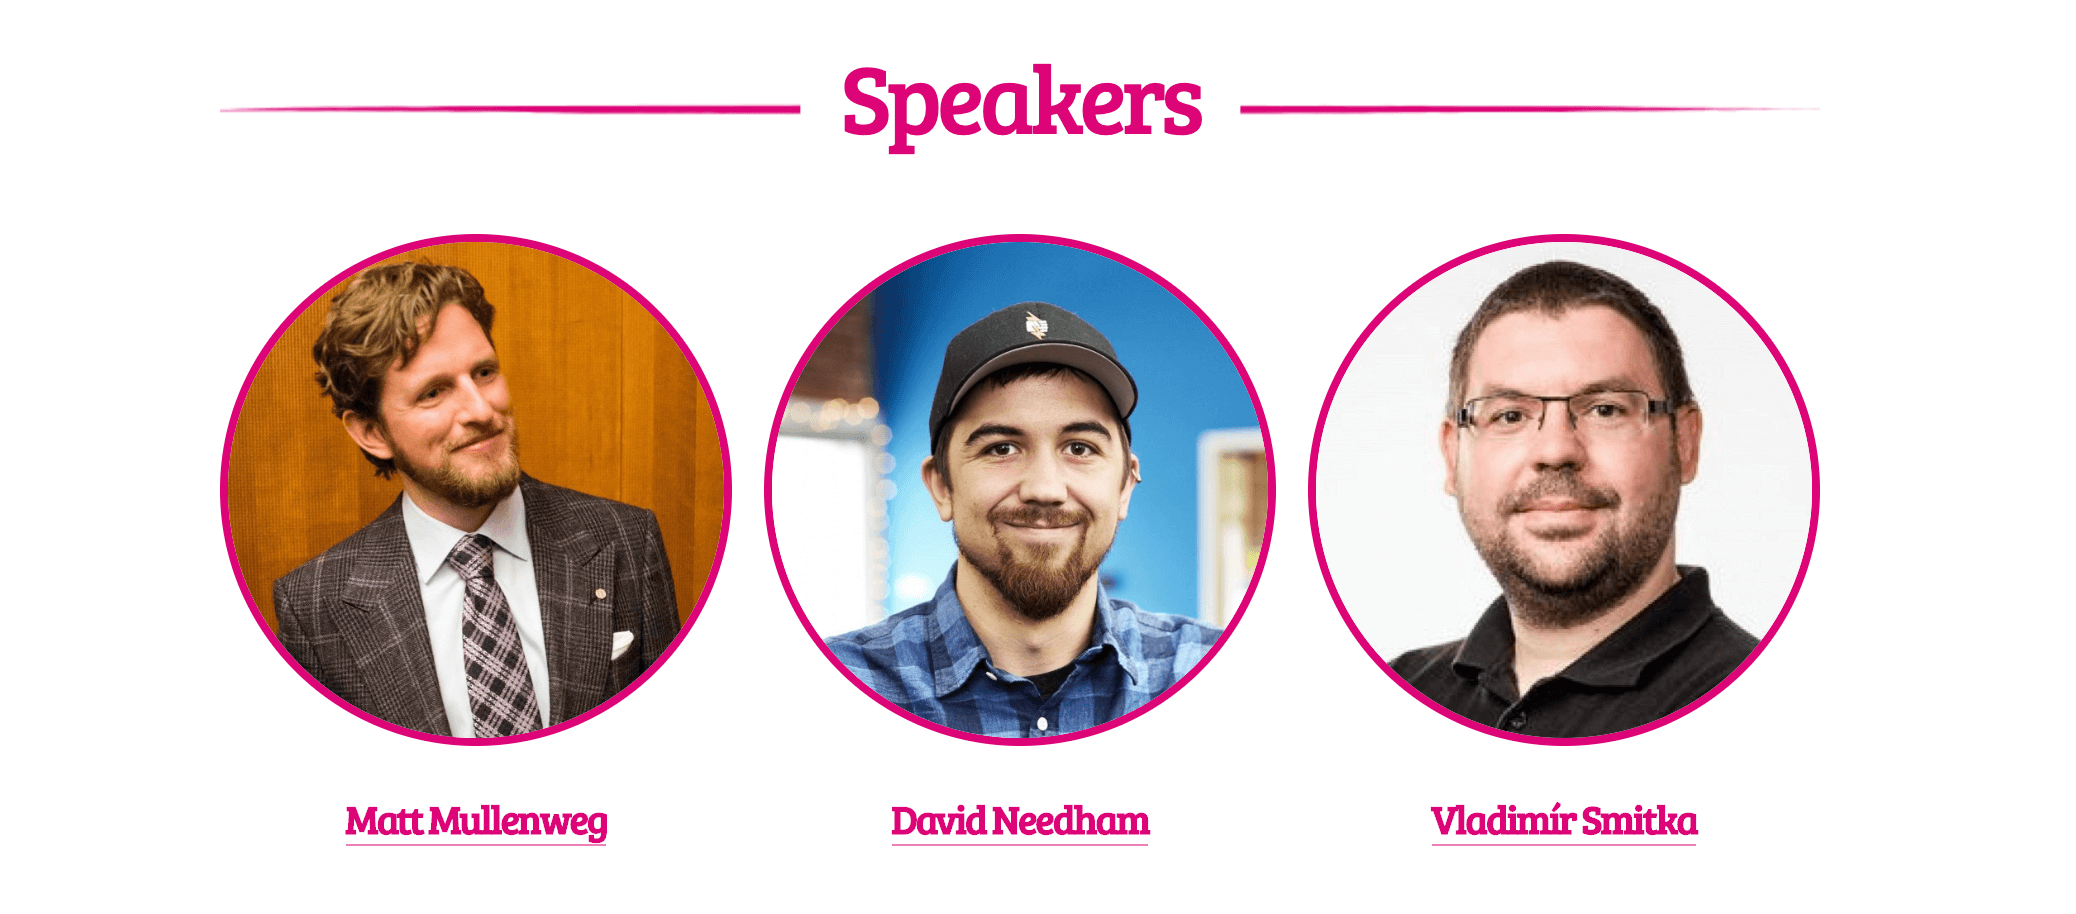 The Speakers page for WordCamp Europe 2019.